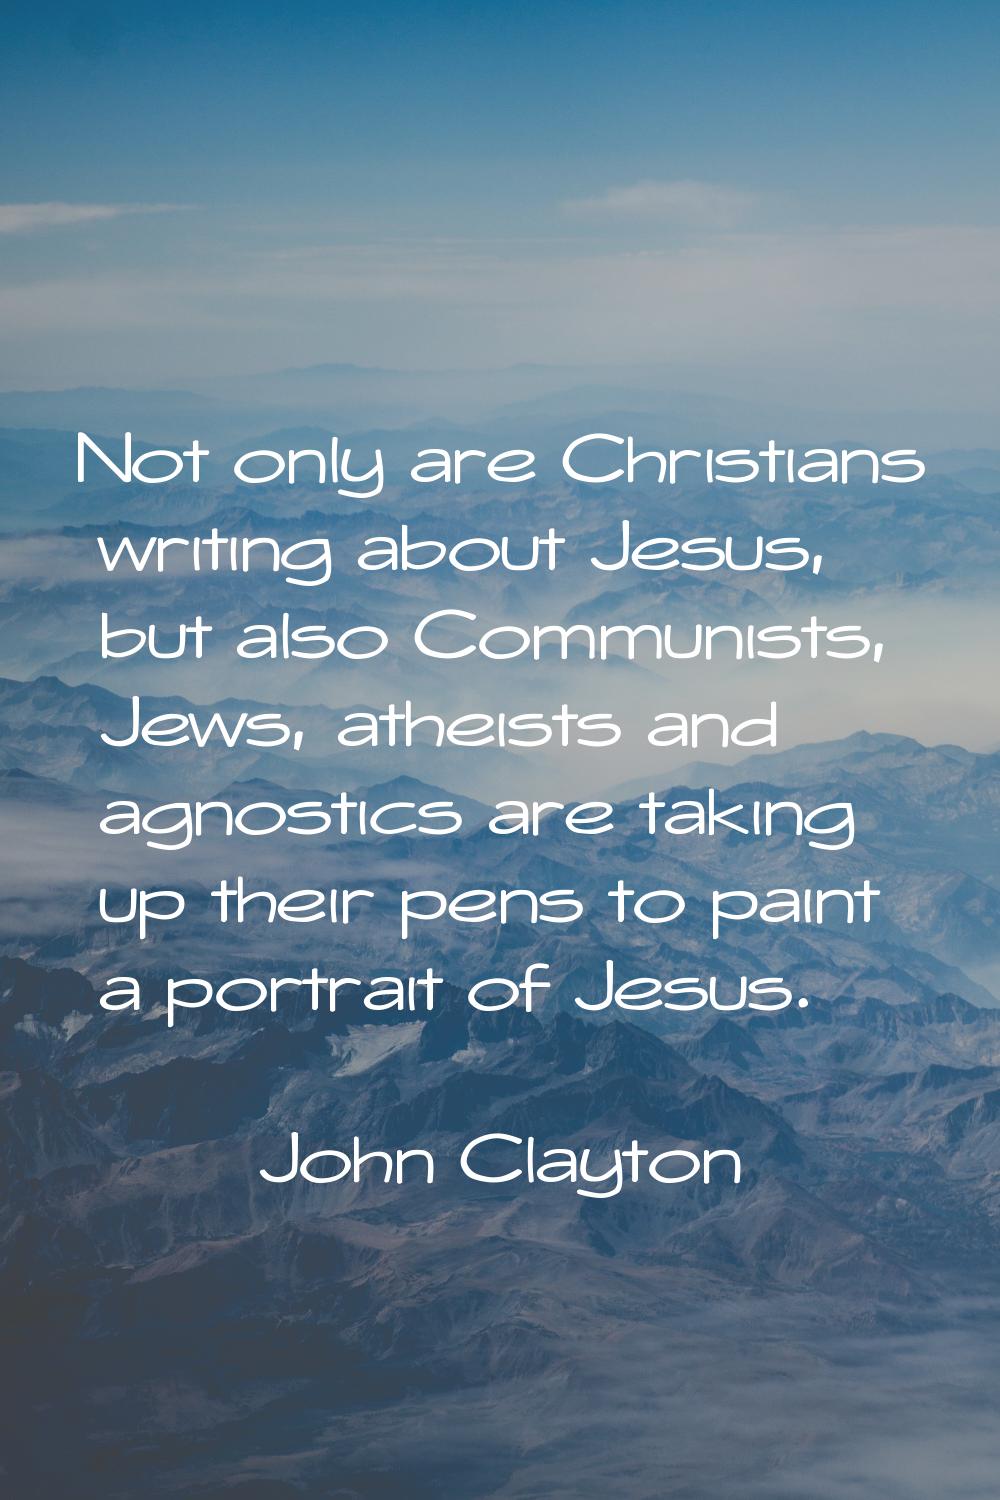 Not only are Christians writing about Jesus, but also Communists, Jews, atheists and agnostics are 